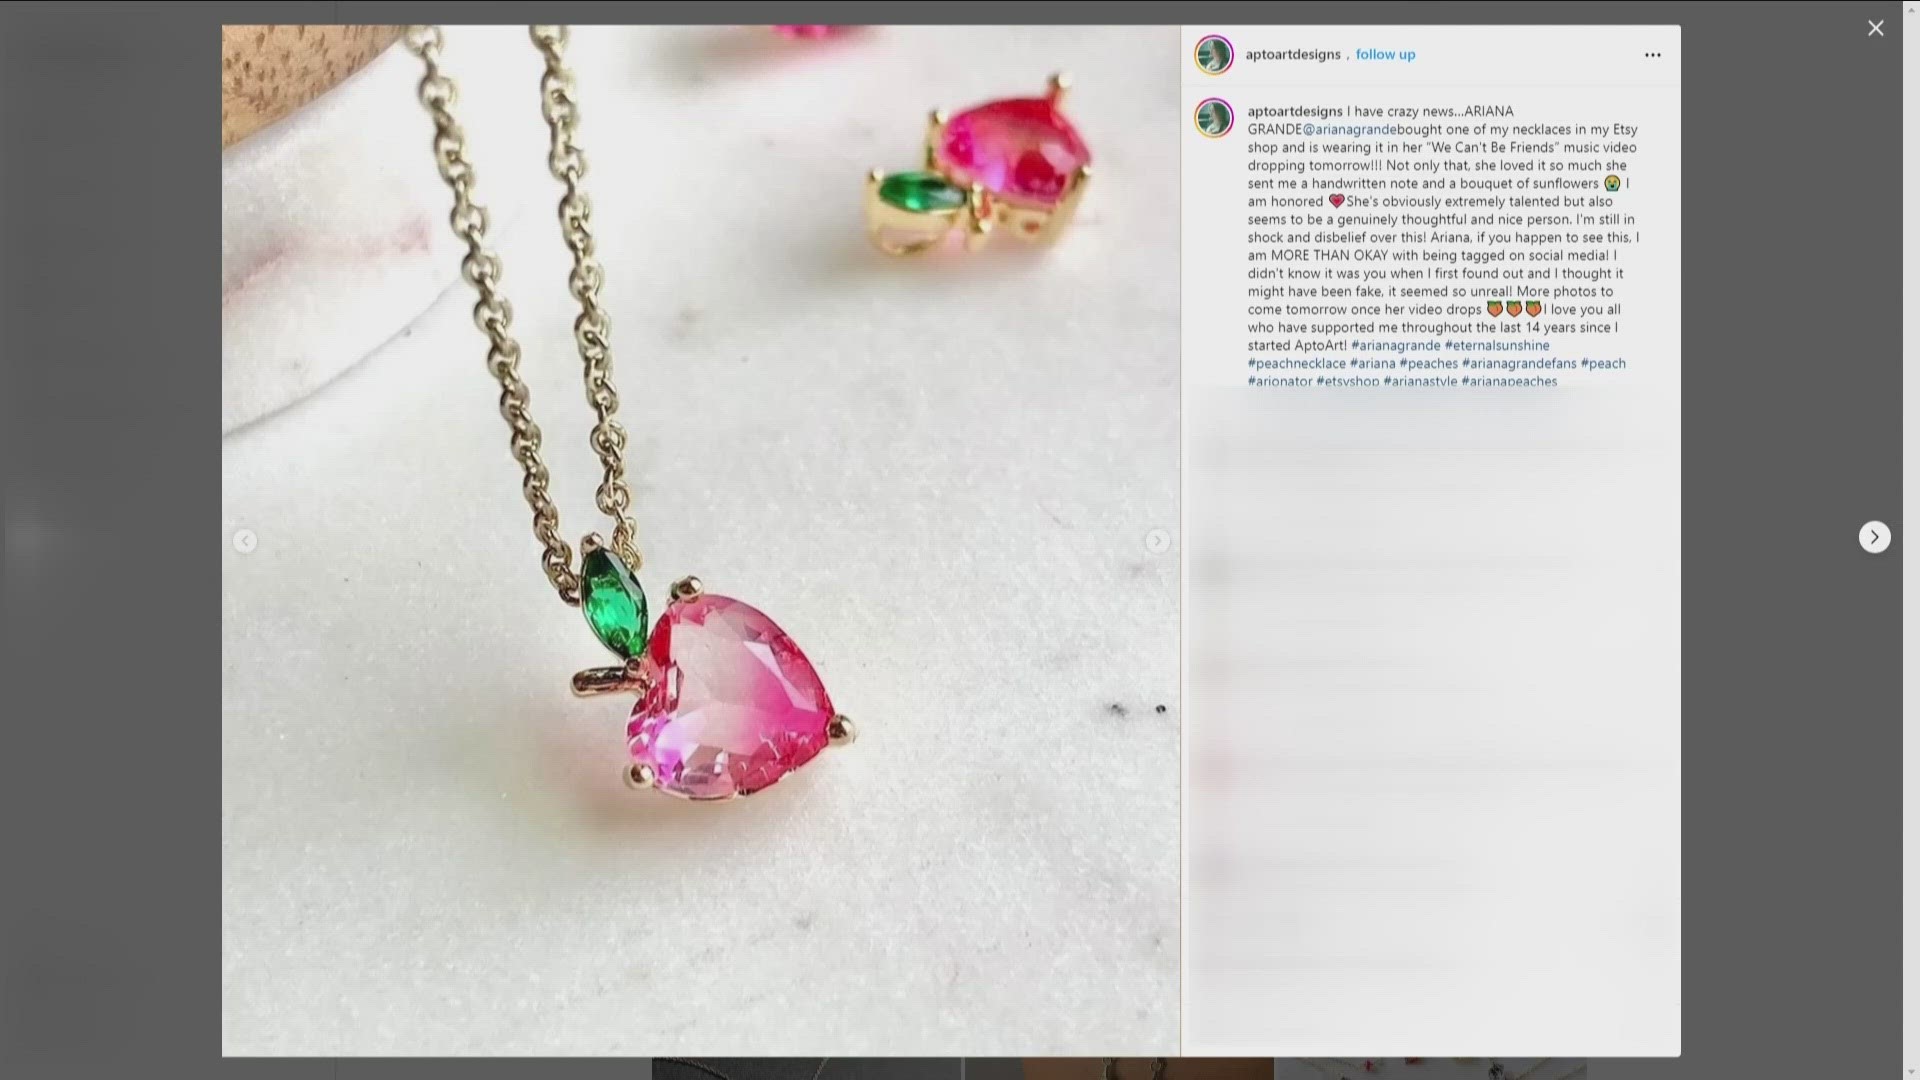 Grace Raines of Apto Art Designs shared on Instagram that the signer purchased a pink peach necklace from her Etsy shop.